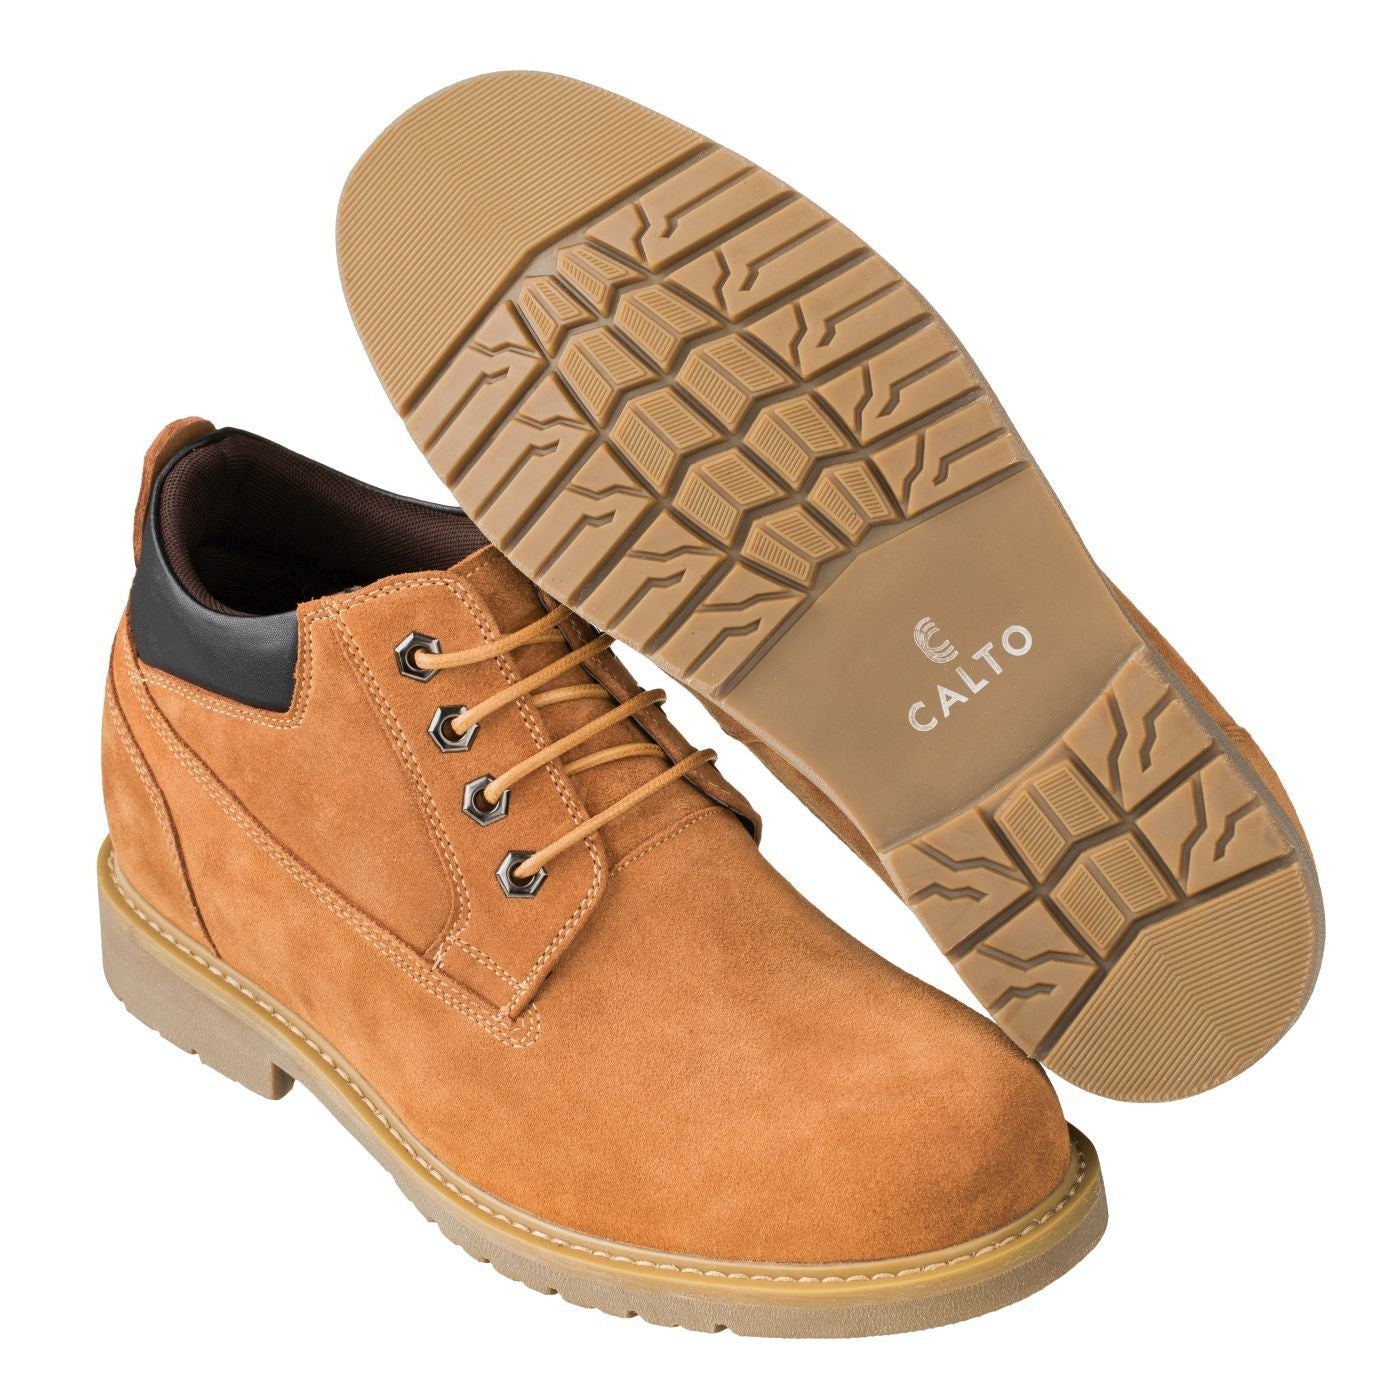 Elevator shoes height increase CALTO - S23021 - 3.2 Inches Taller (Nubuck Brown)